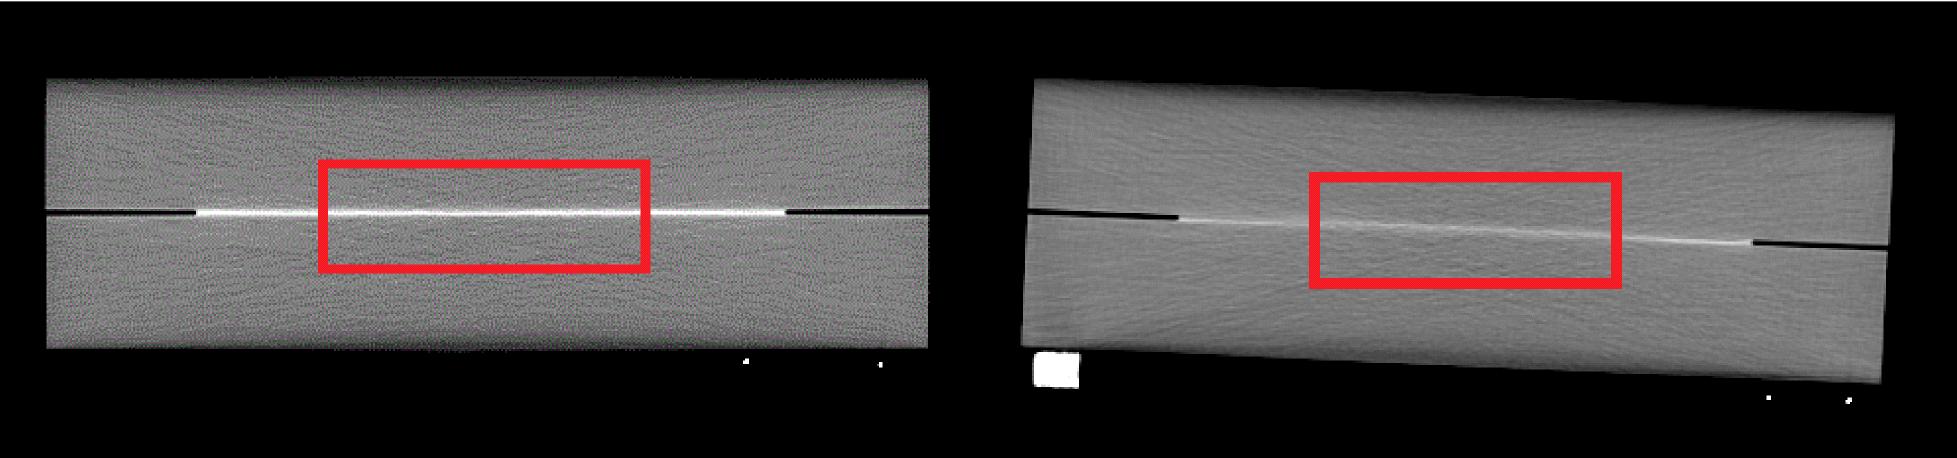 Aluminum plate image in transverse plane for parallel non-oversampling